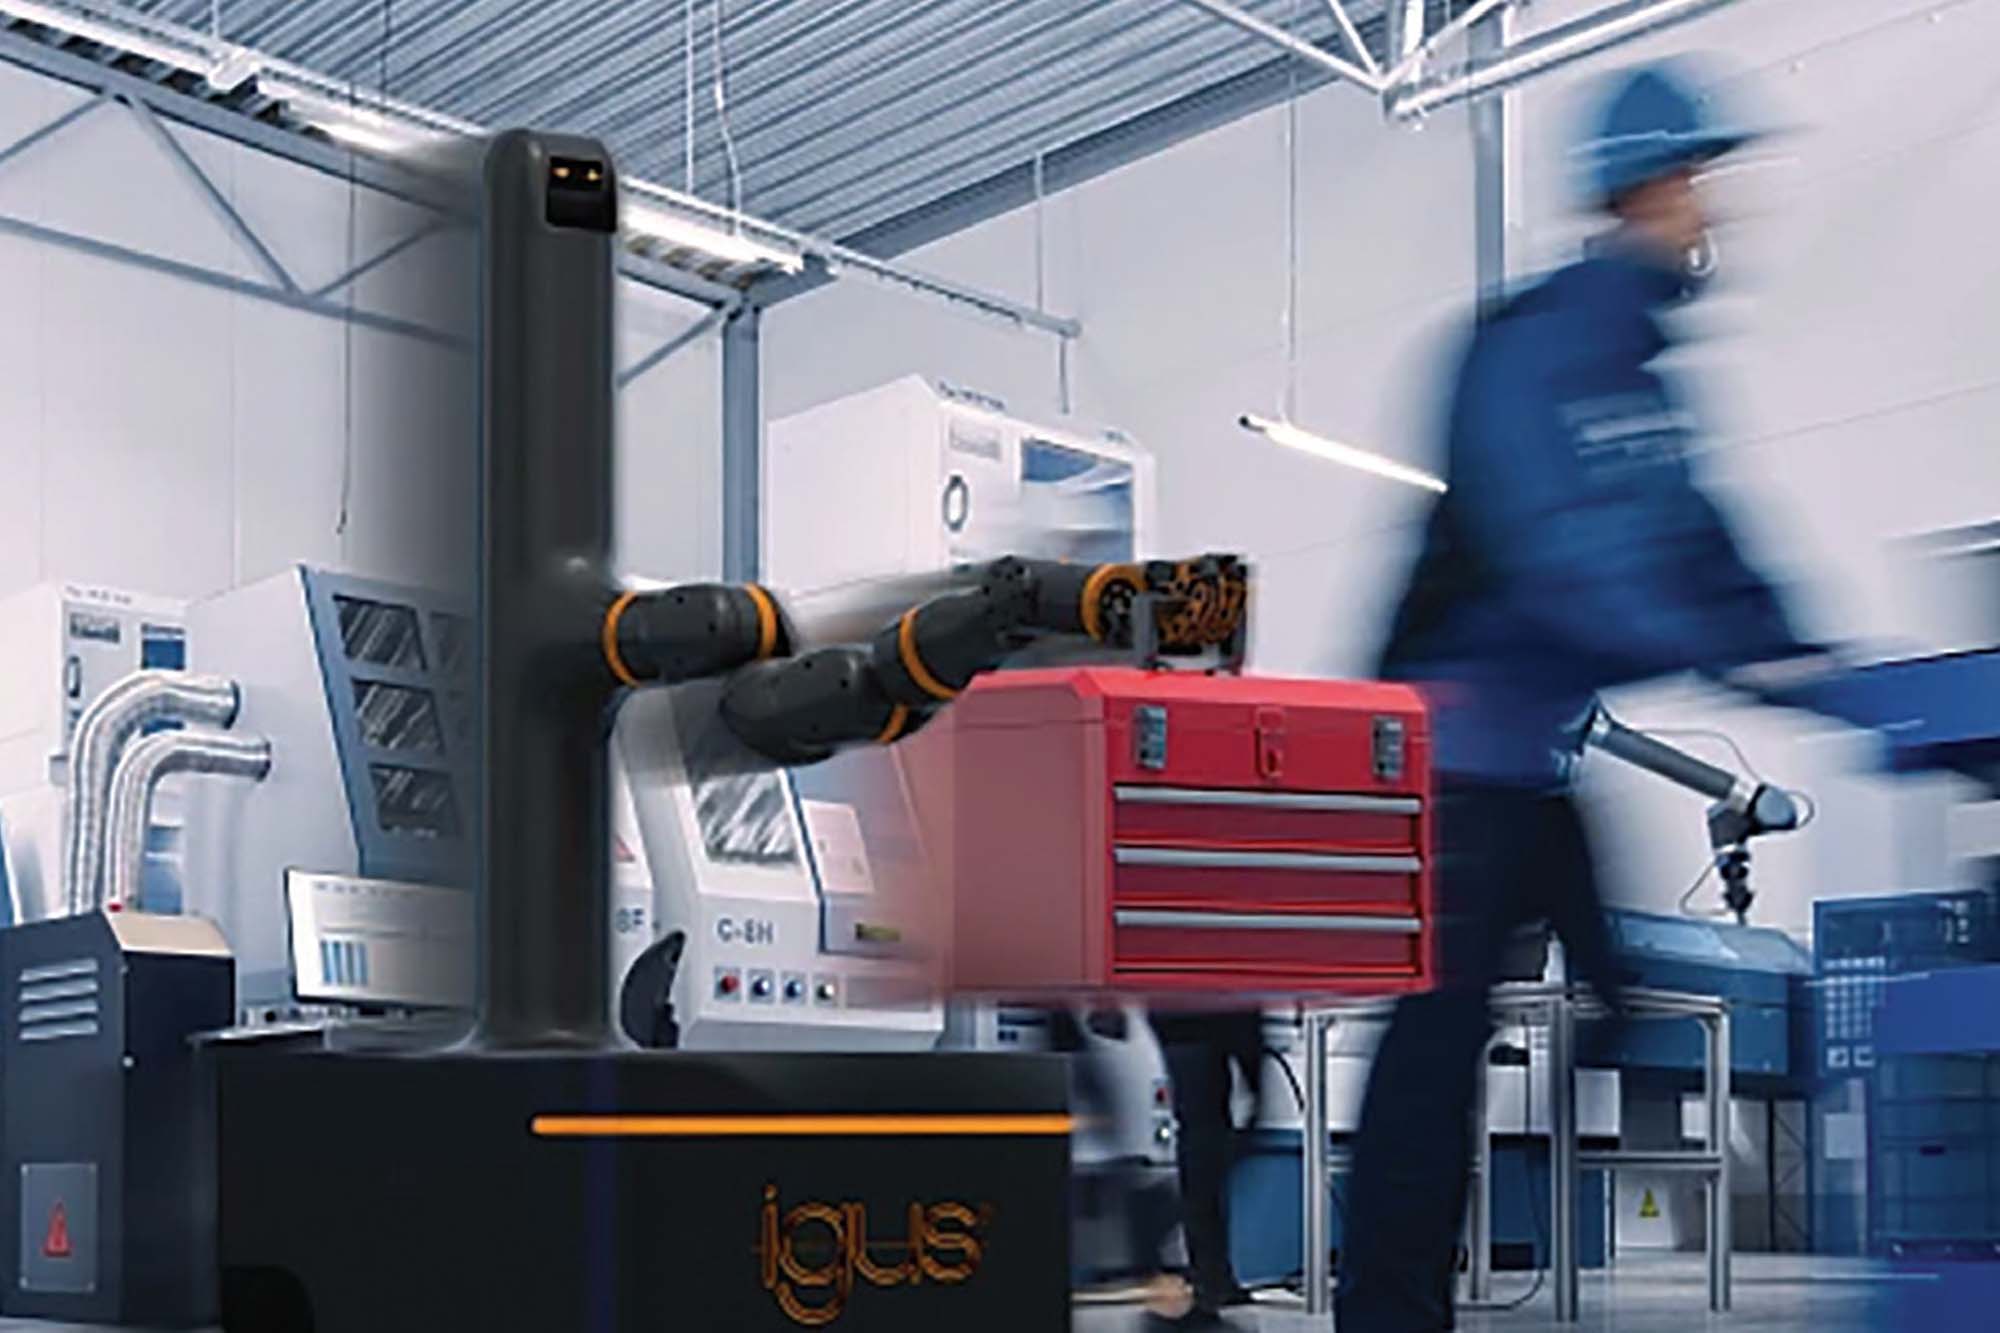 Mobile robots from igus reduce costs for SMEs